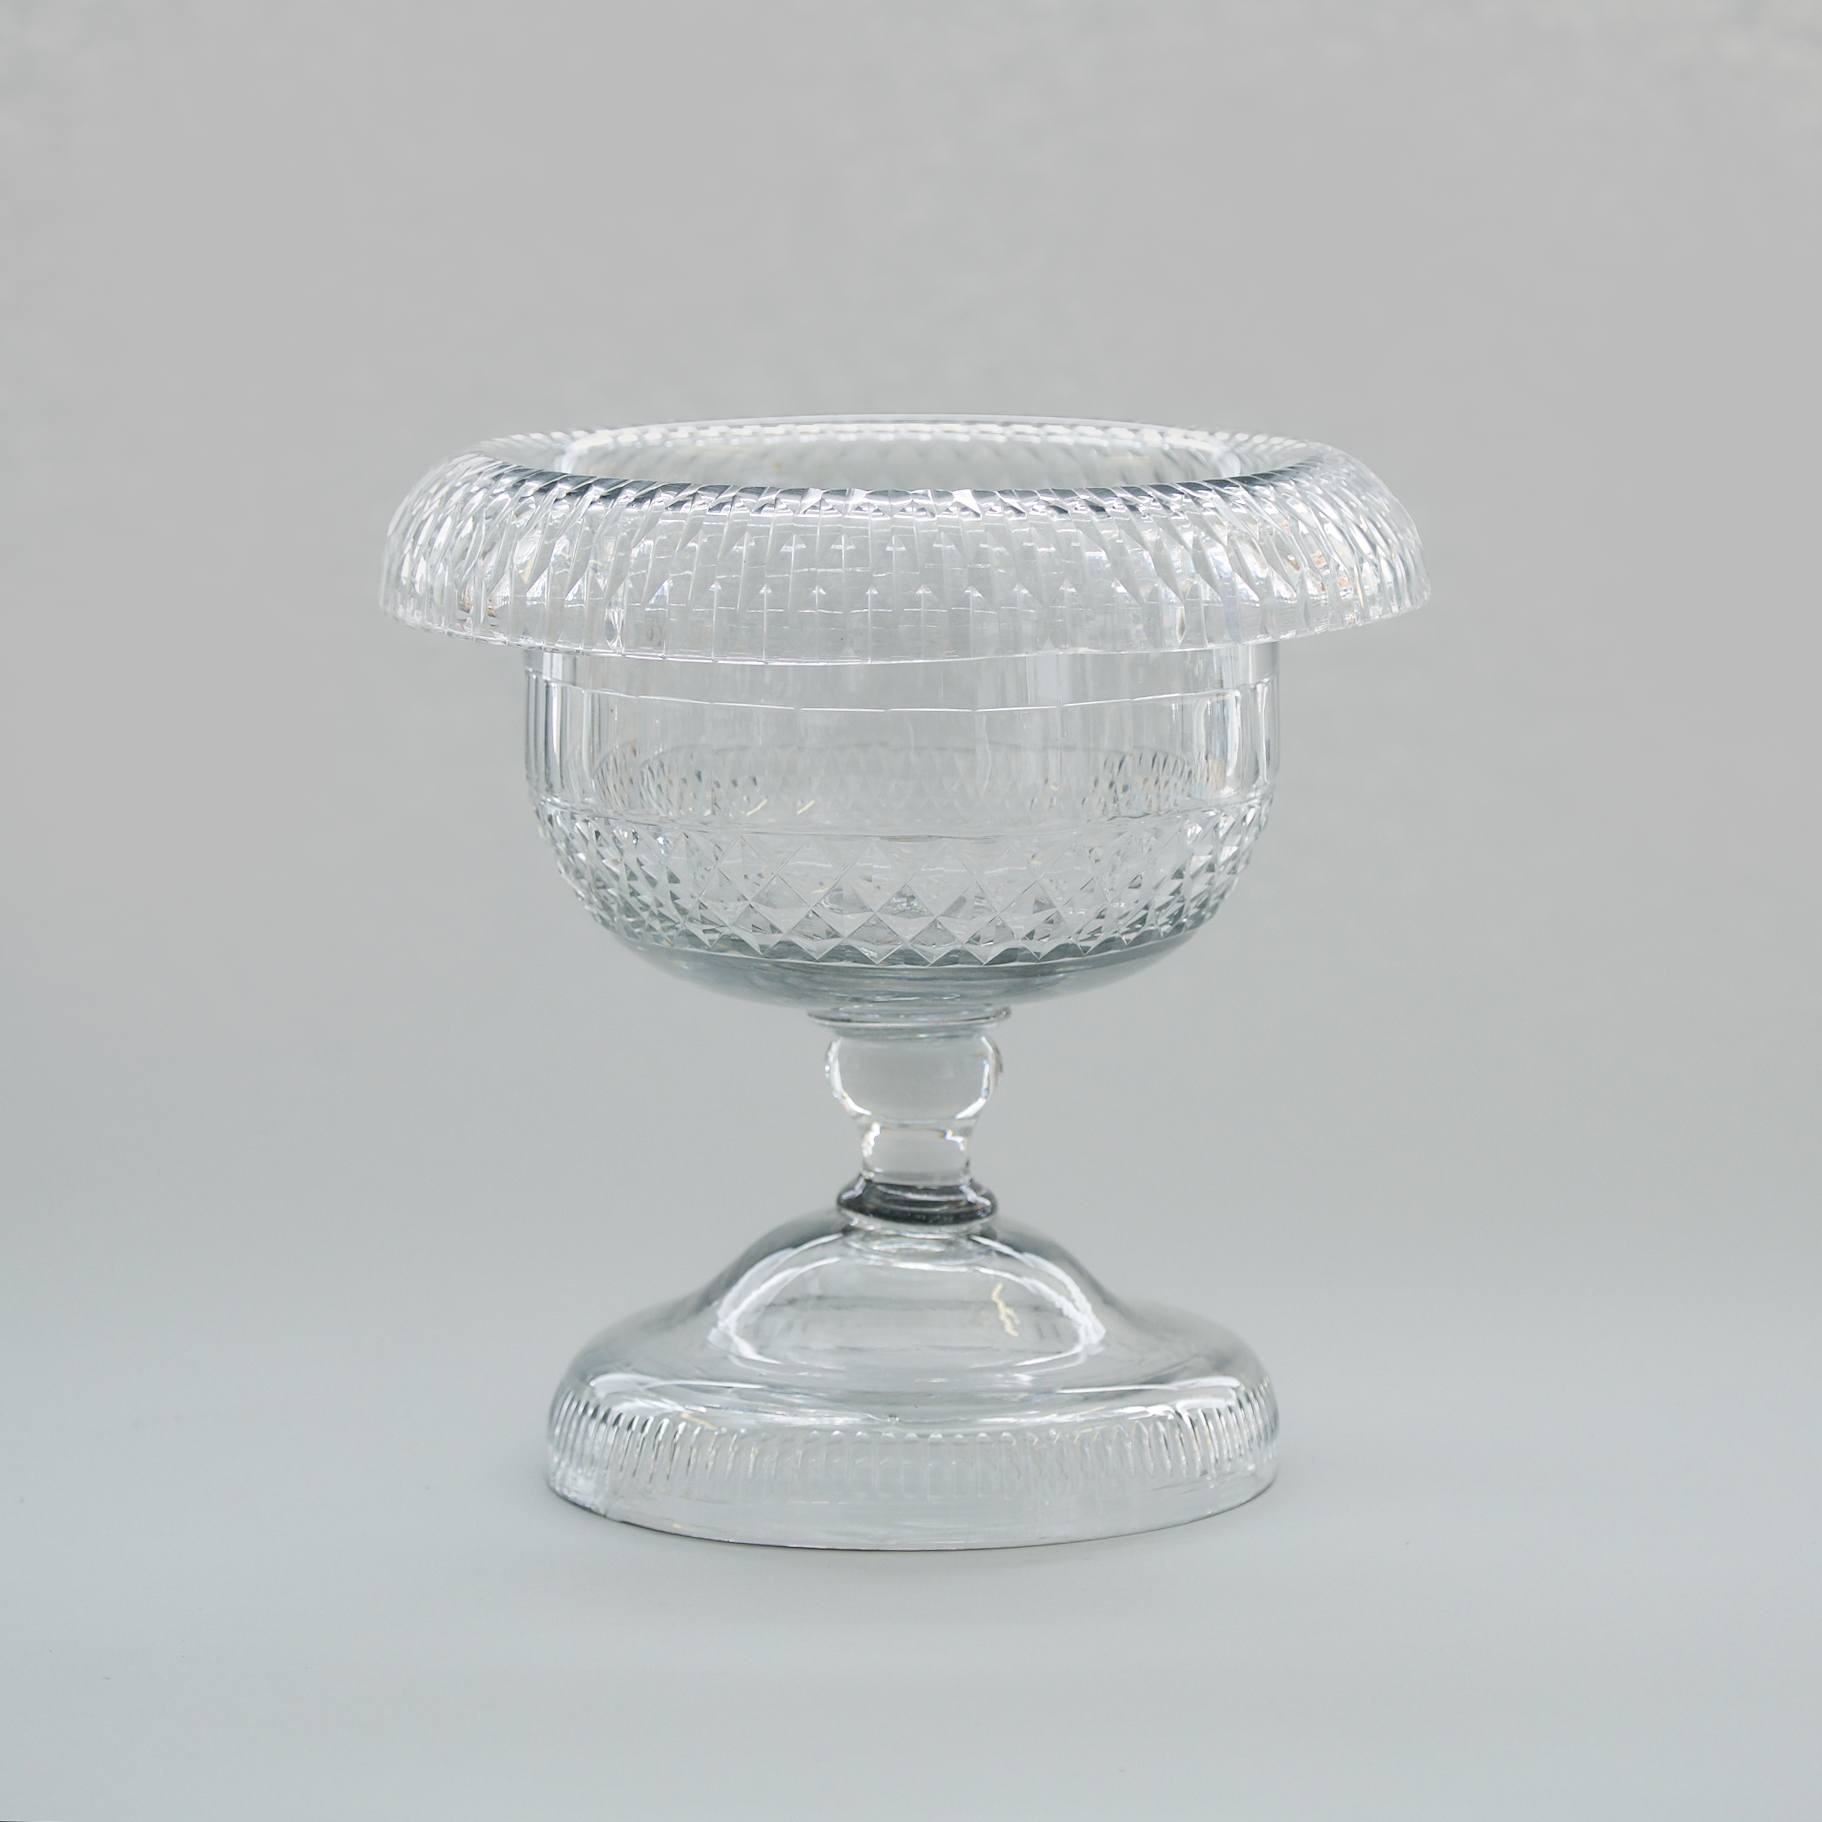 Anglo-Irish Cut Glass Pedestal Footed Bowl, early 19th century